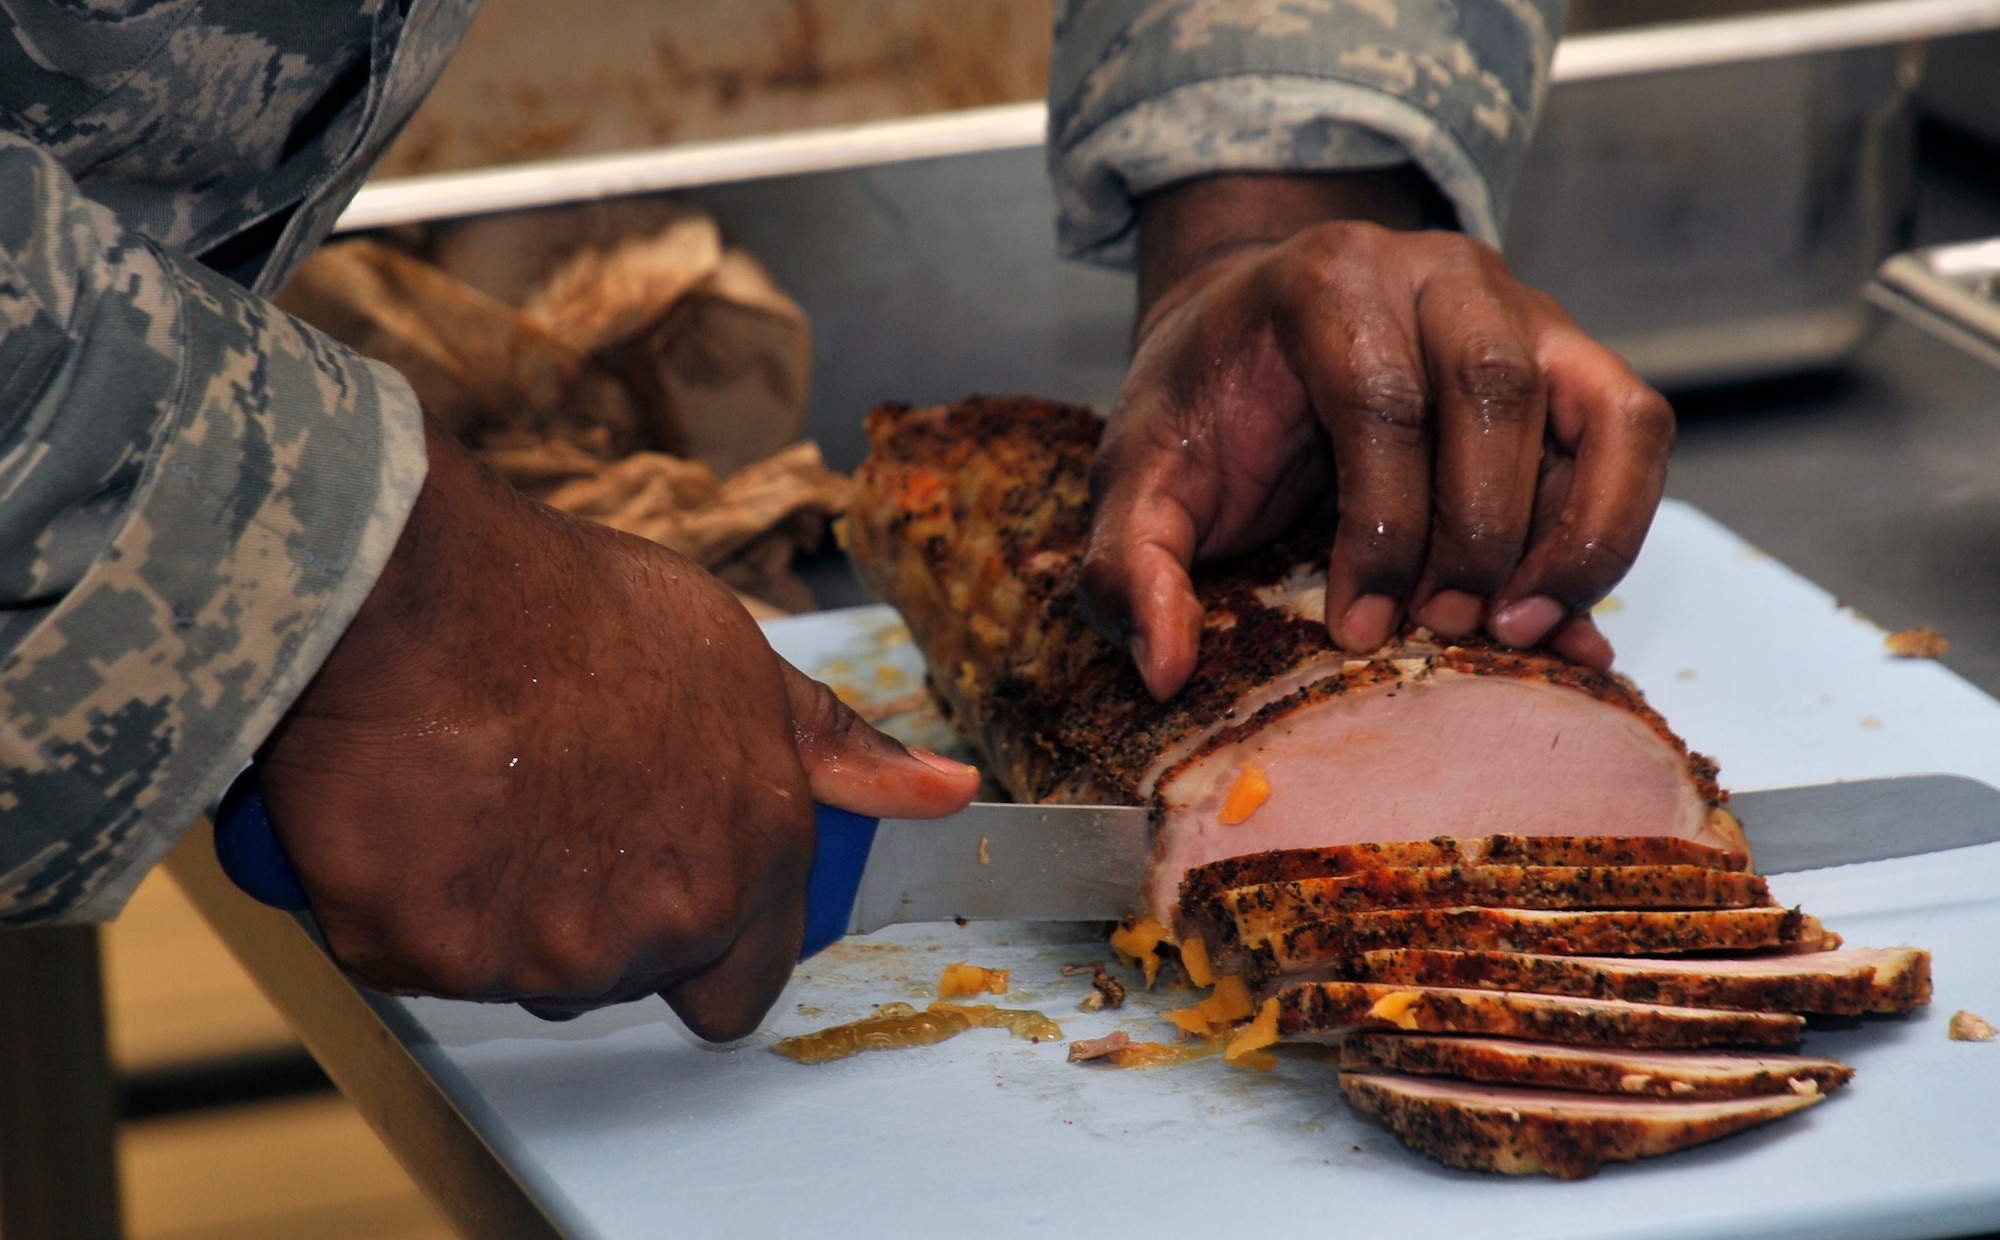 U.S. Air Force Staff Sgt. Andre Lewis, 35th Force Support Squadron food services shift leader, prepares servings of pork in the Grissom Dining Facility kitchen at Misawa Air Base, Japan, April 18, 2013. Customers are given the opportunity to have meals at the dining facility that provide nutrition from all of the different food groups. (U.S. Air Force photo by Airman 1st Class Zachary Kee)